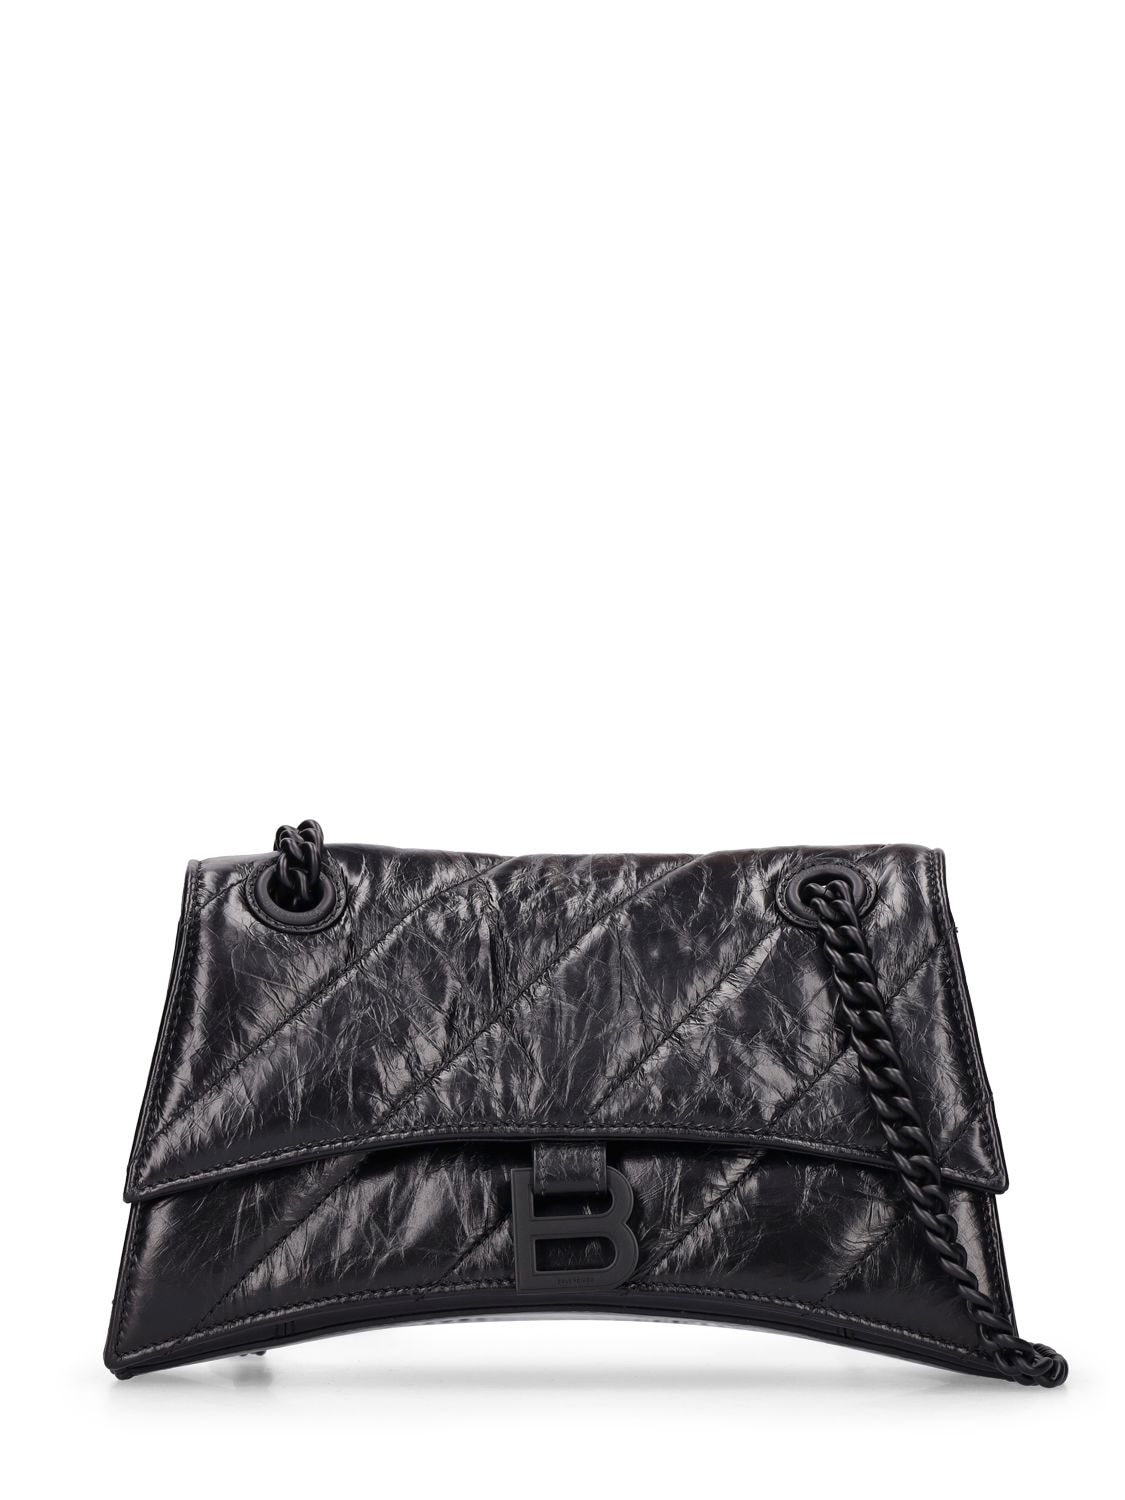 BALENCIAGA Crush Mini Quilted Leather Crossbody Bag for Women